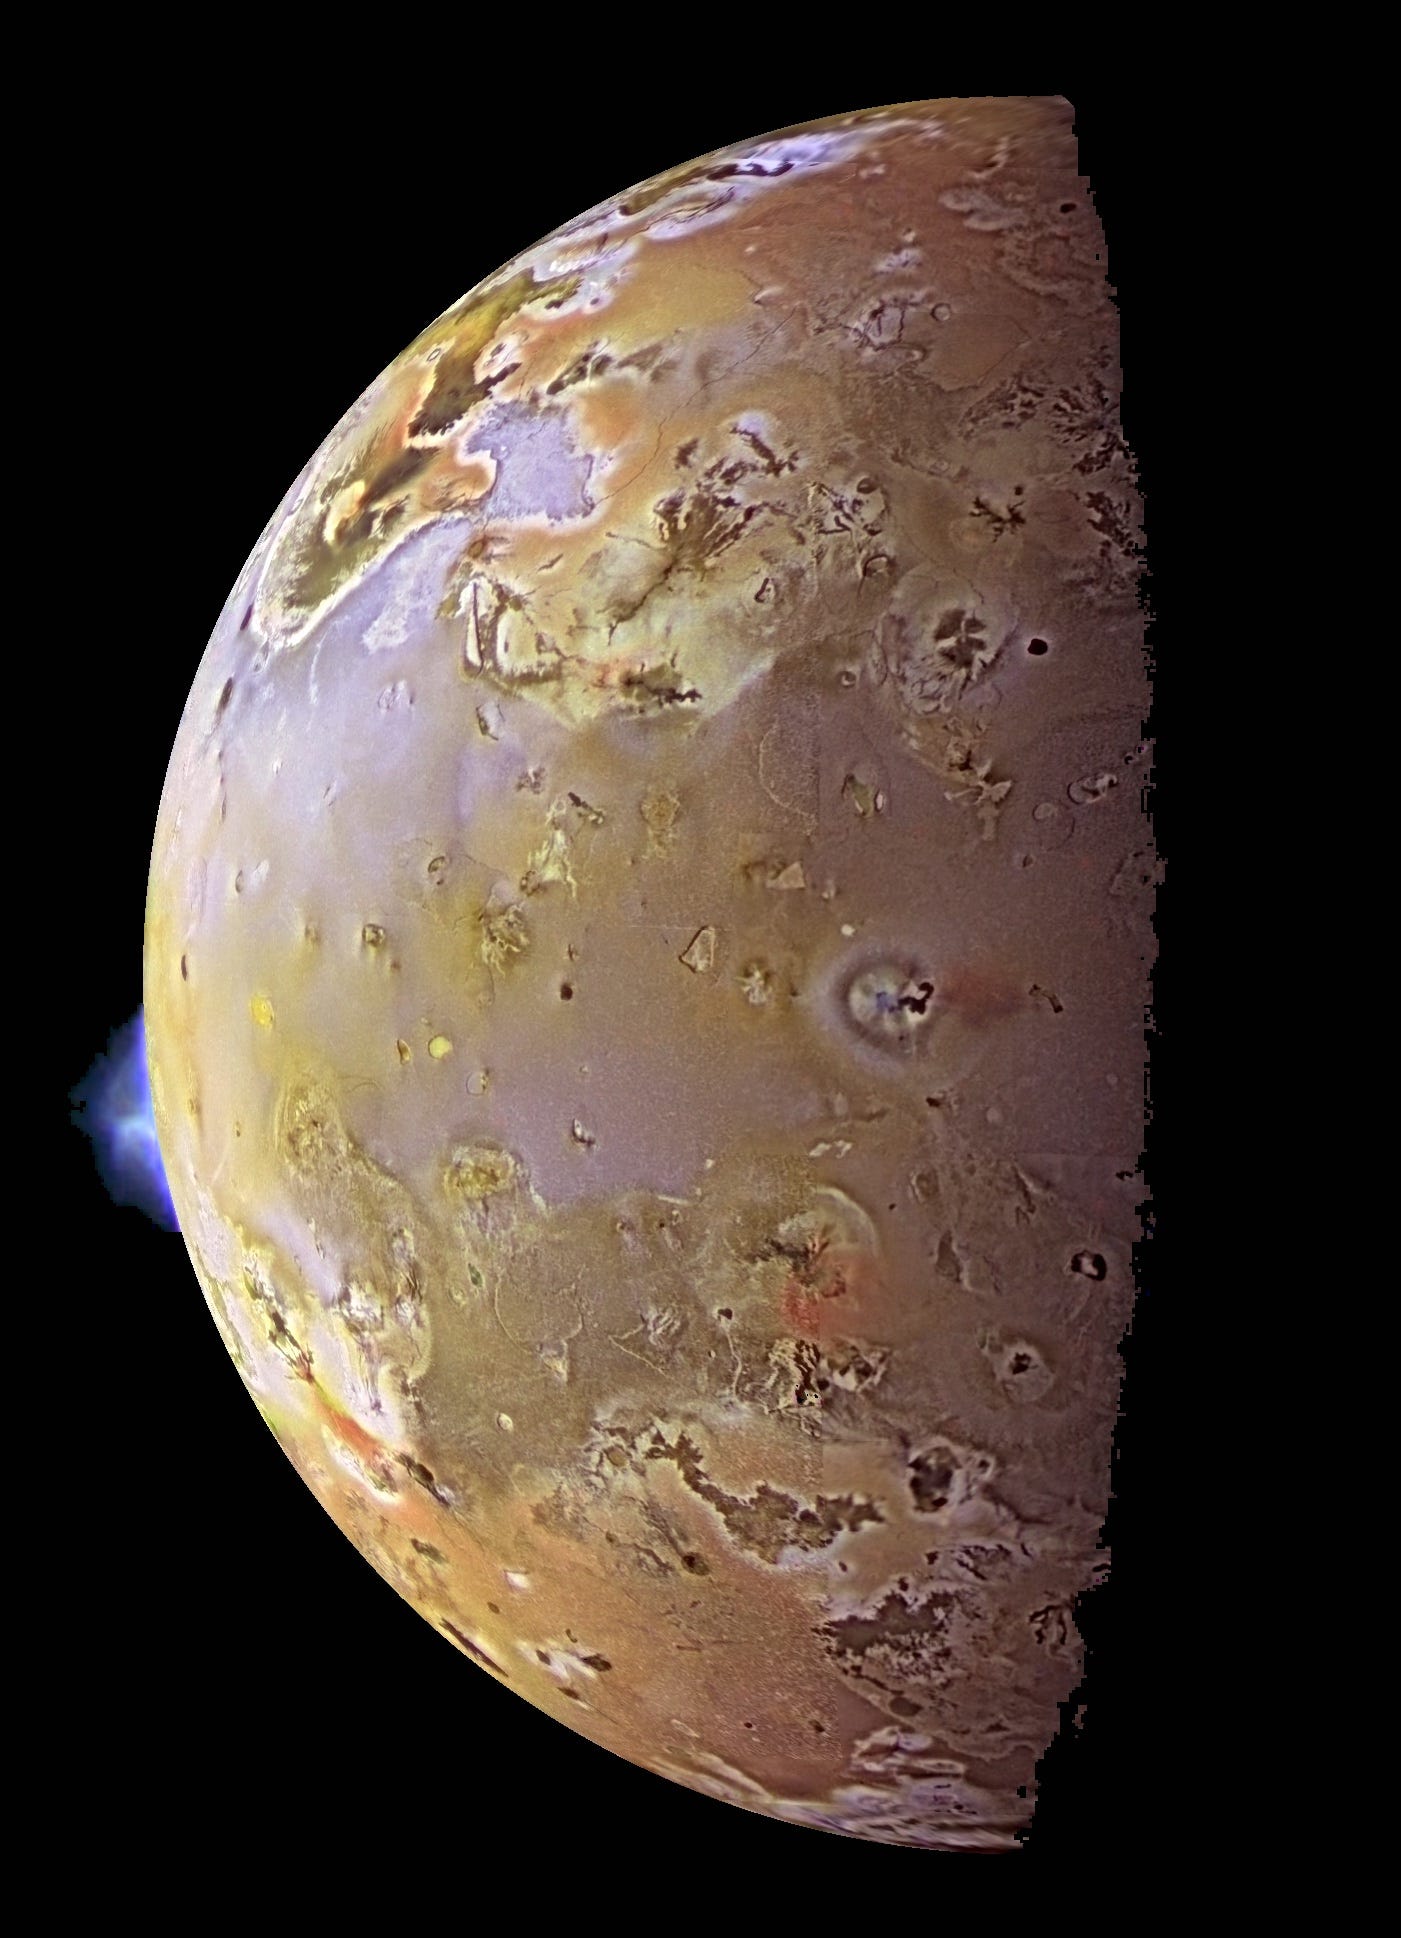 io moon of jupiter with swirling colors from lava flows and an erupting volcano on the horizon